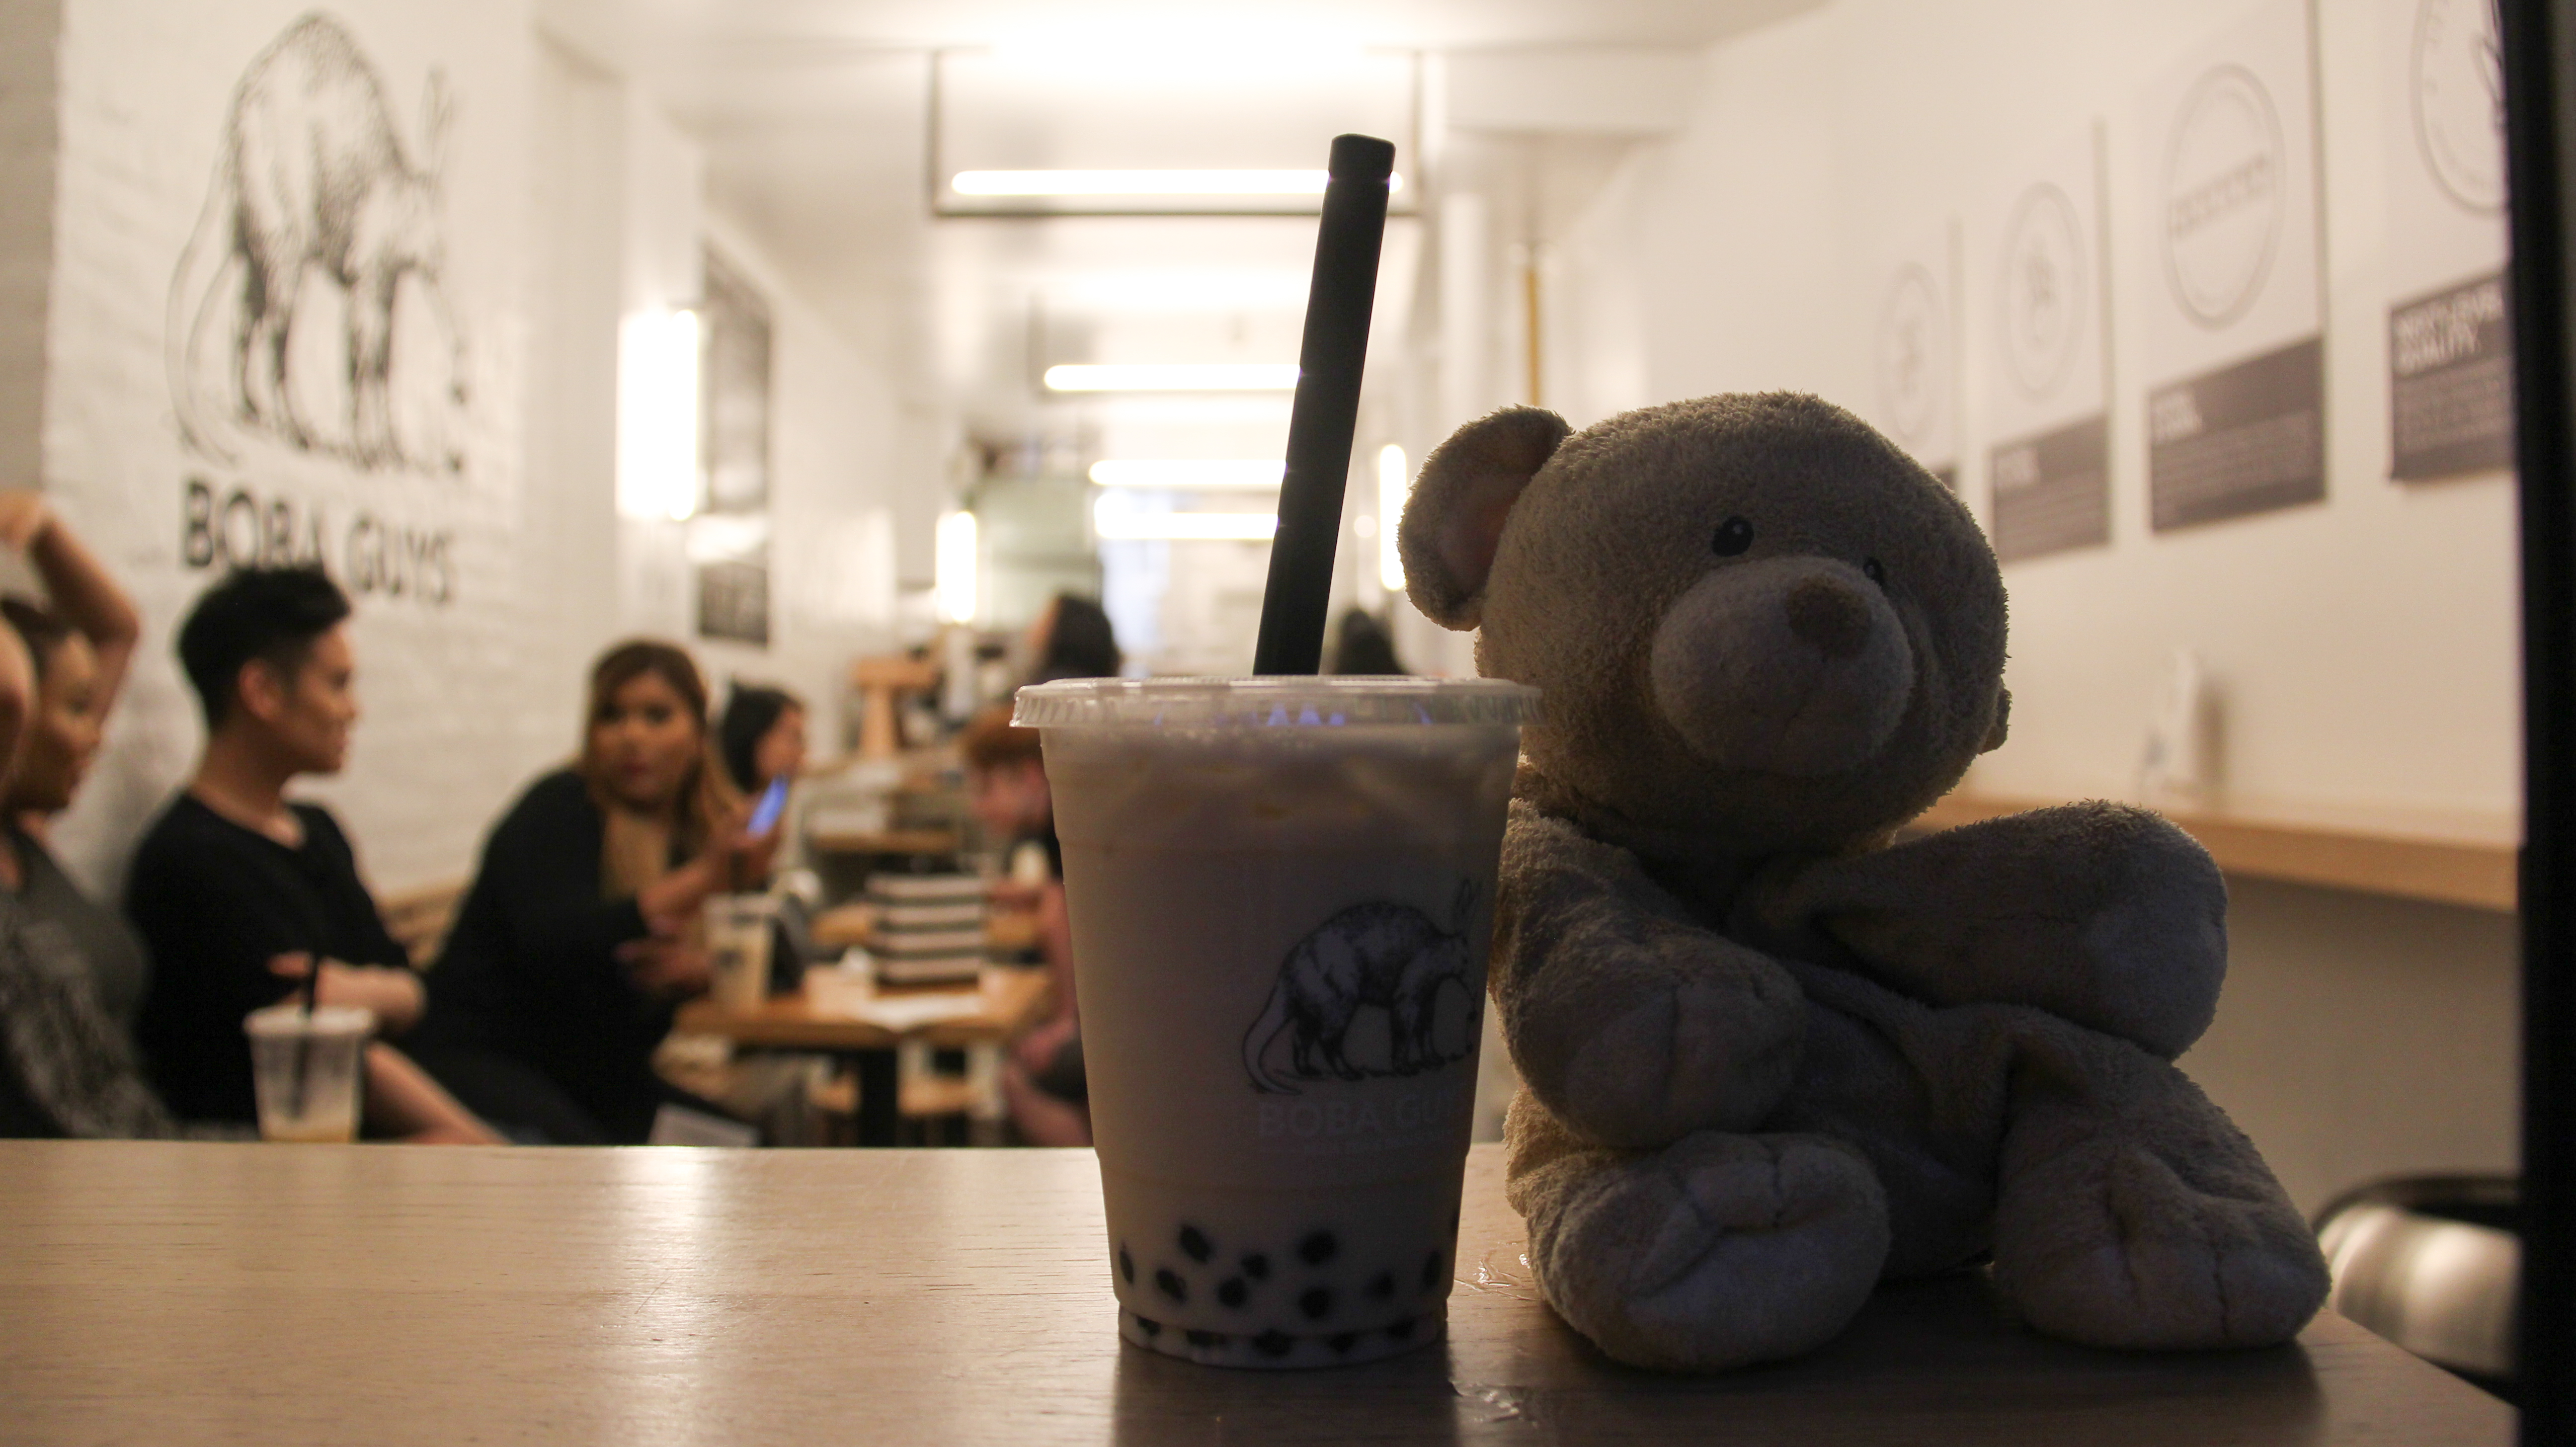 Boba Guys in NY. (We couldn't resist!)